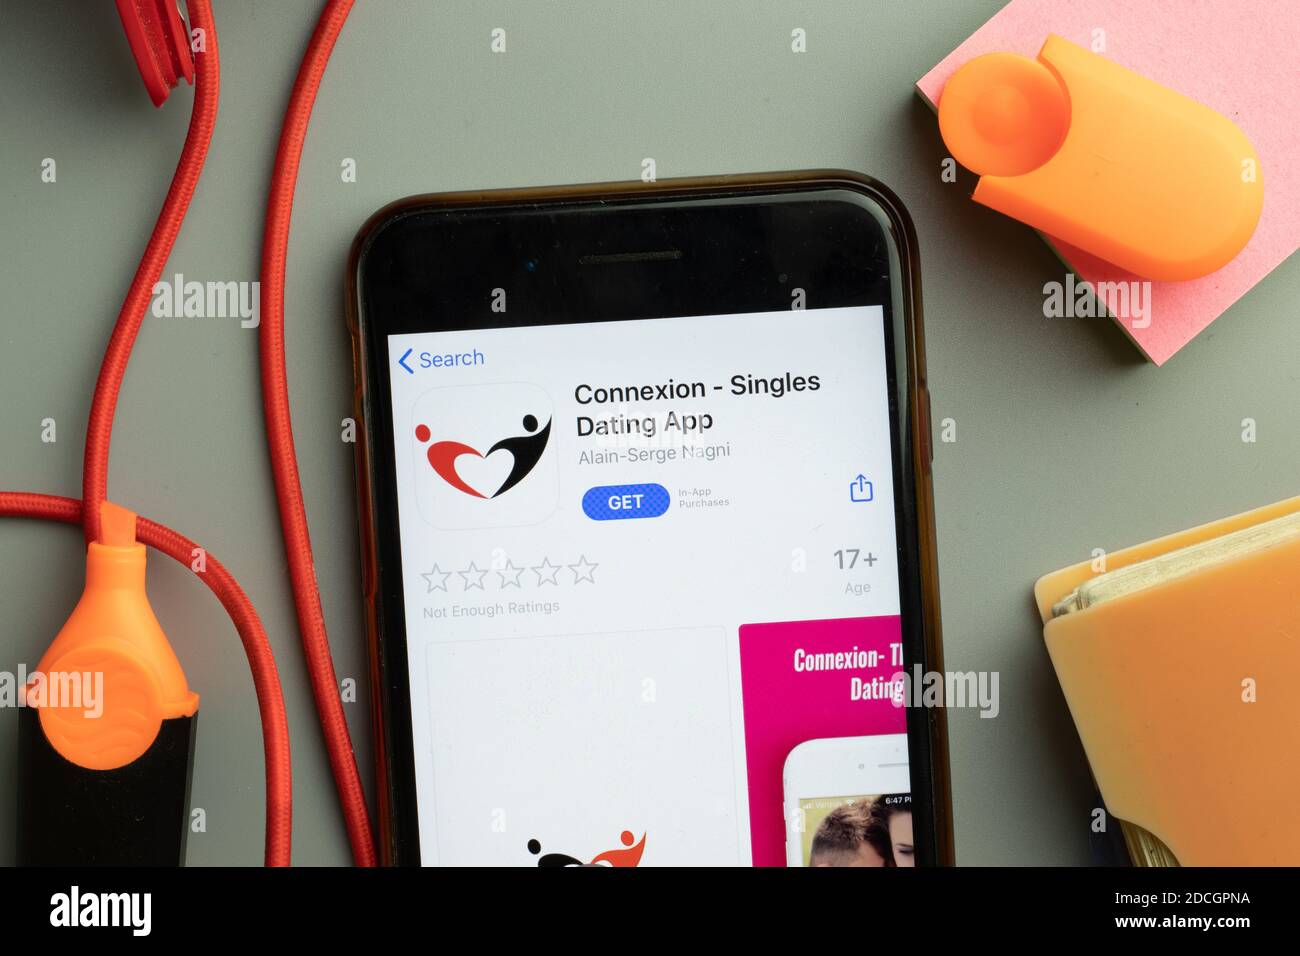 New York, United States - 7 November 2020: Phone screen close-up with Connexion Singles Dating mobile app logo on display, Illustrative Editorial. Stock Photo